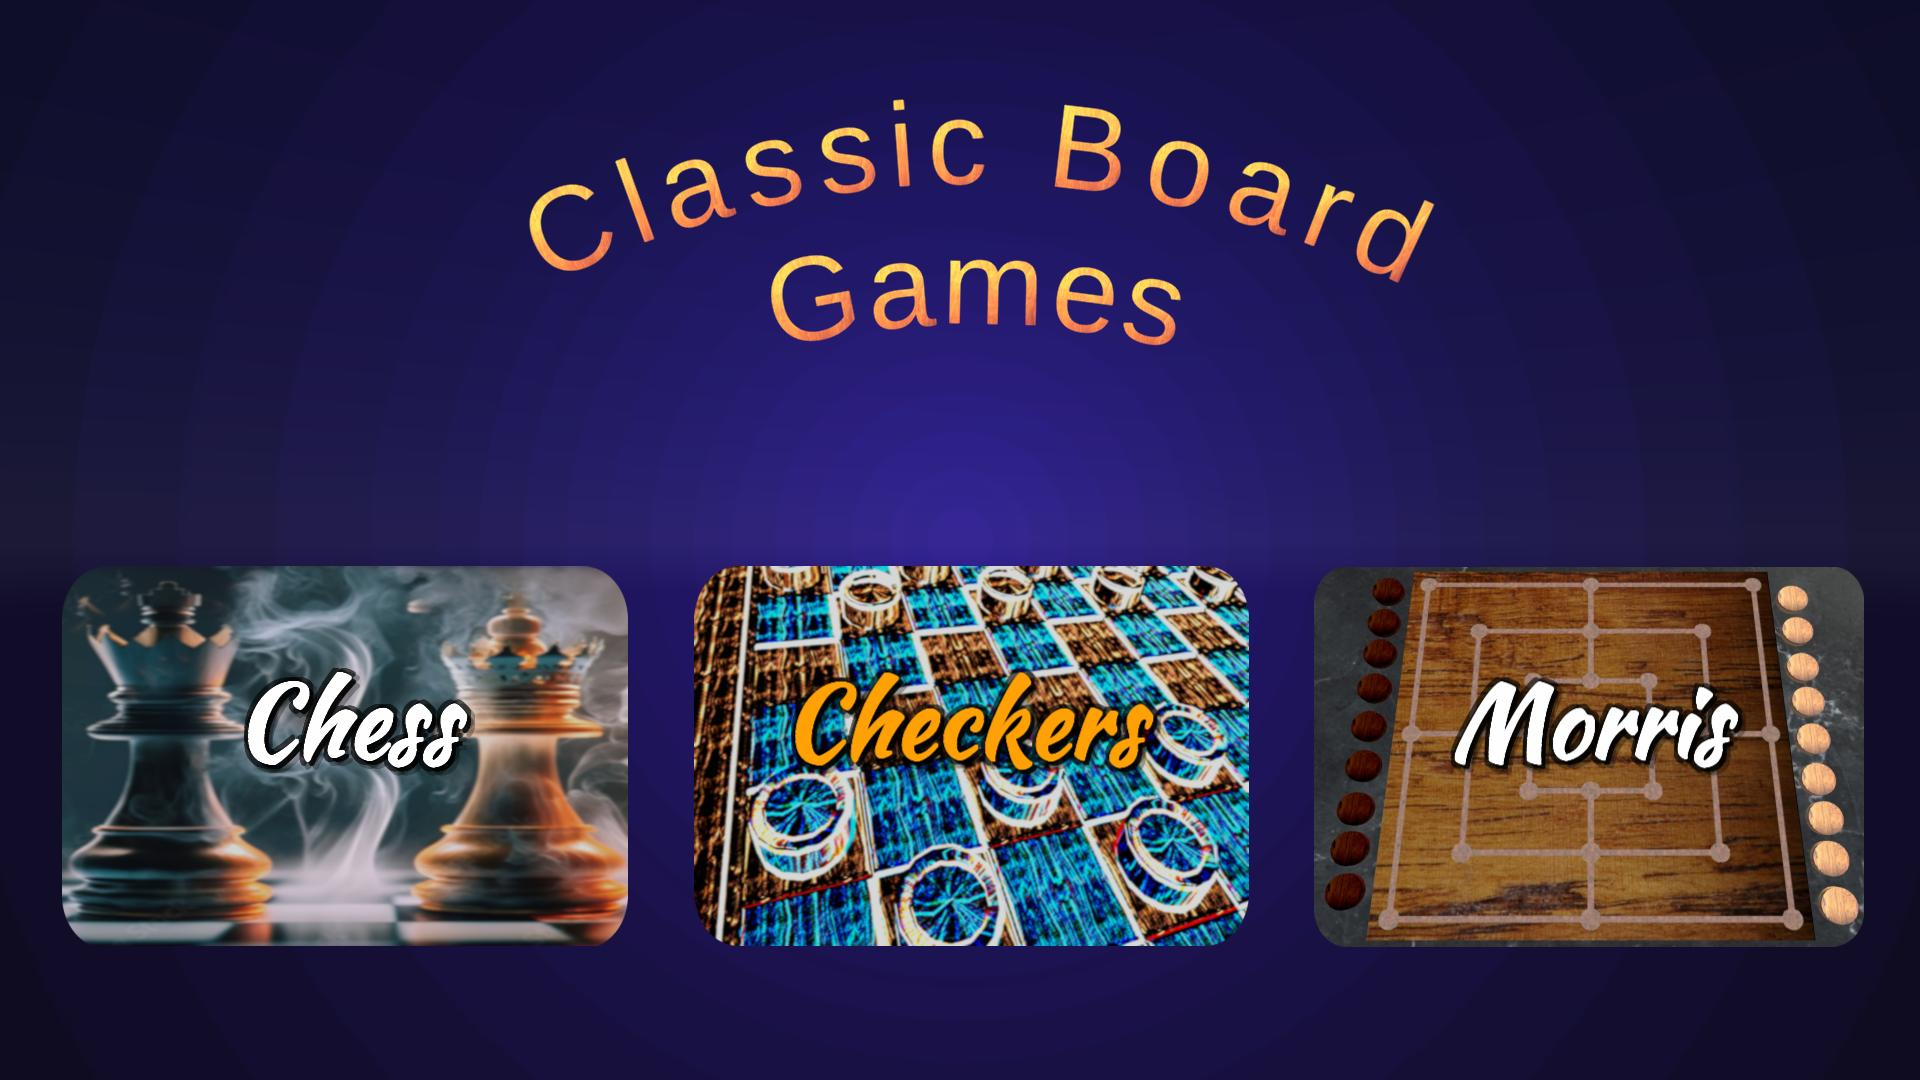 Free Table Games Games No Download 